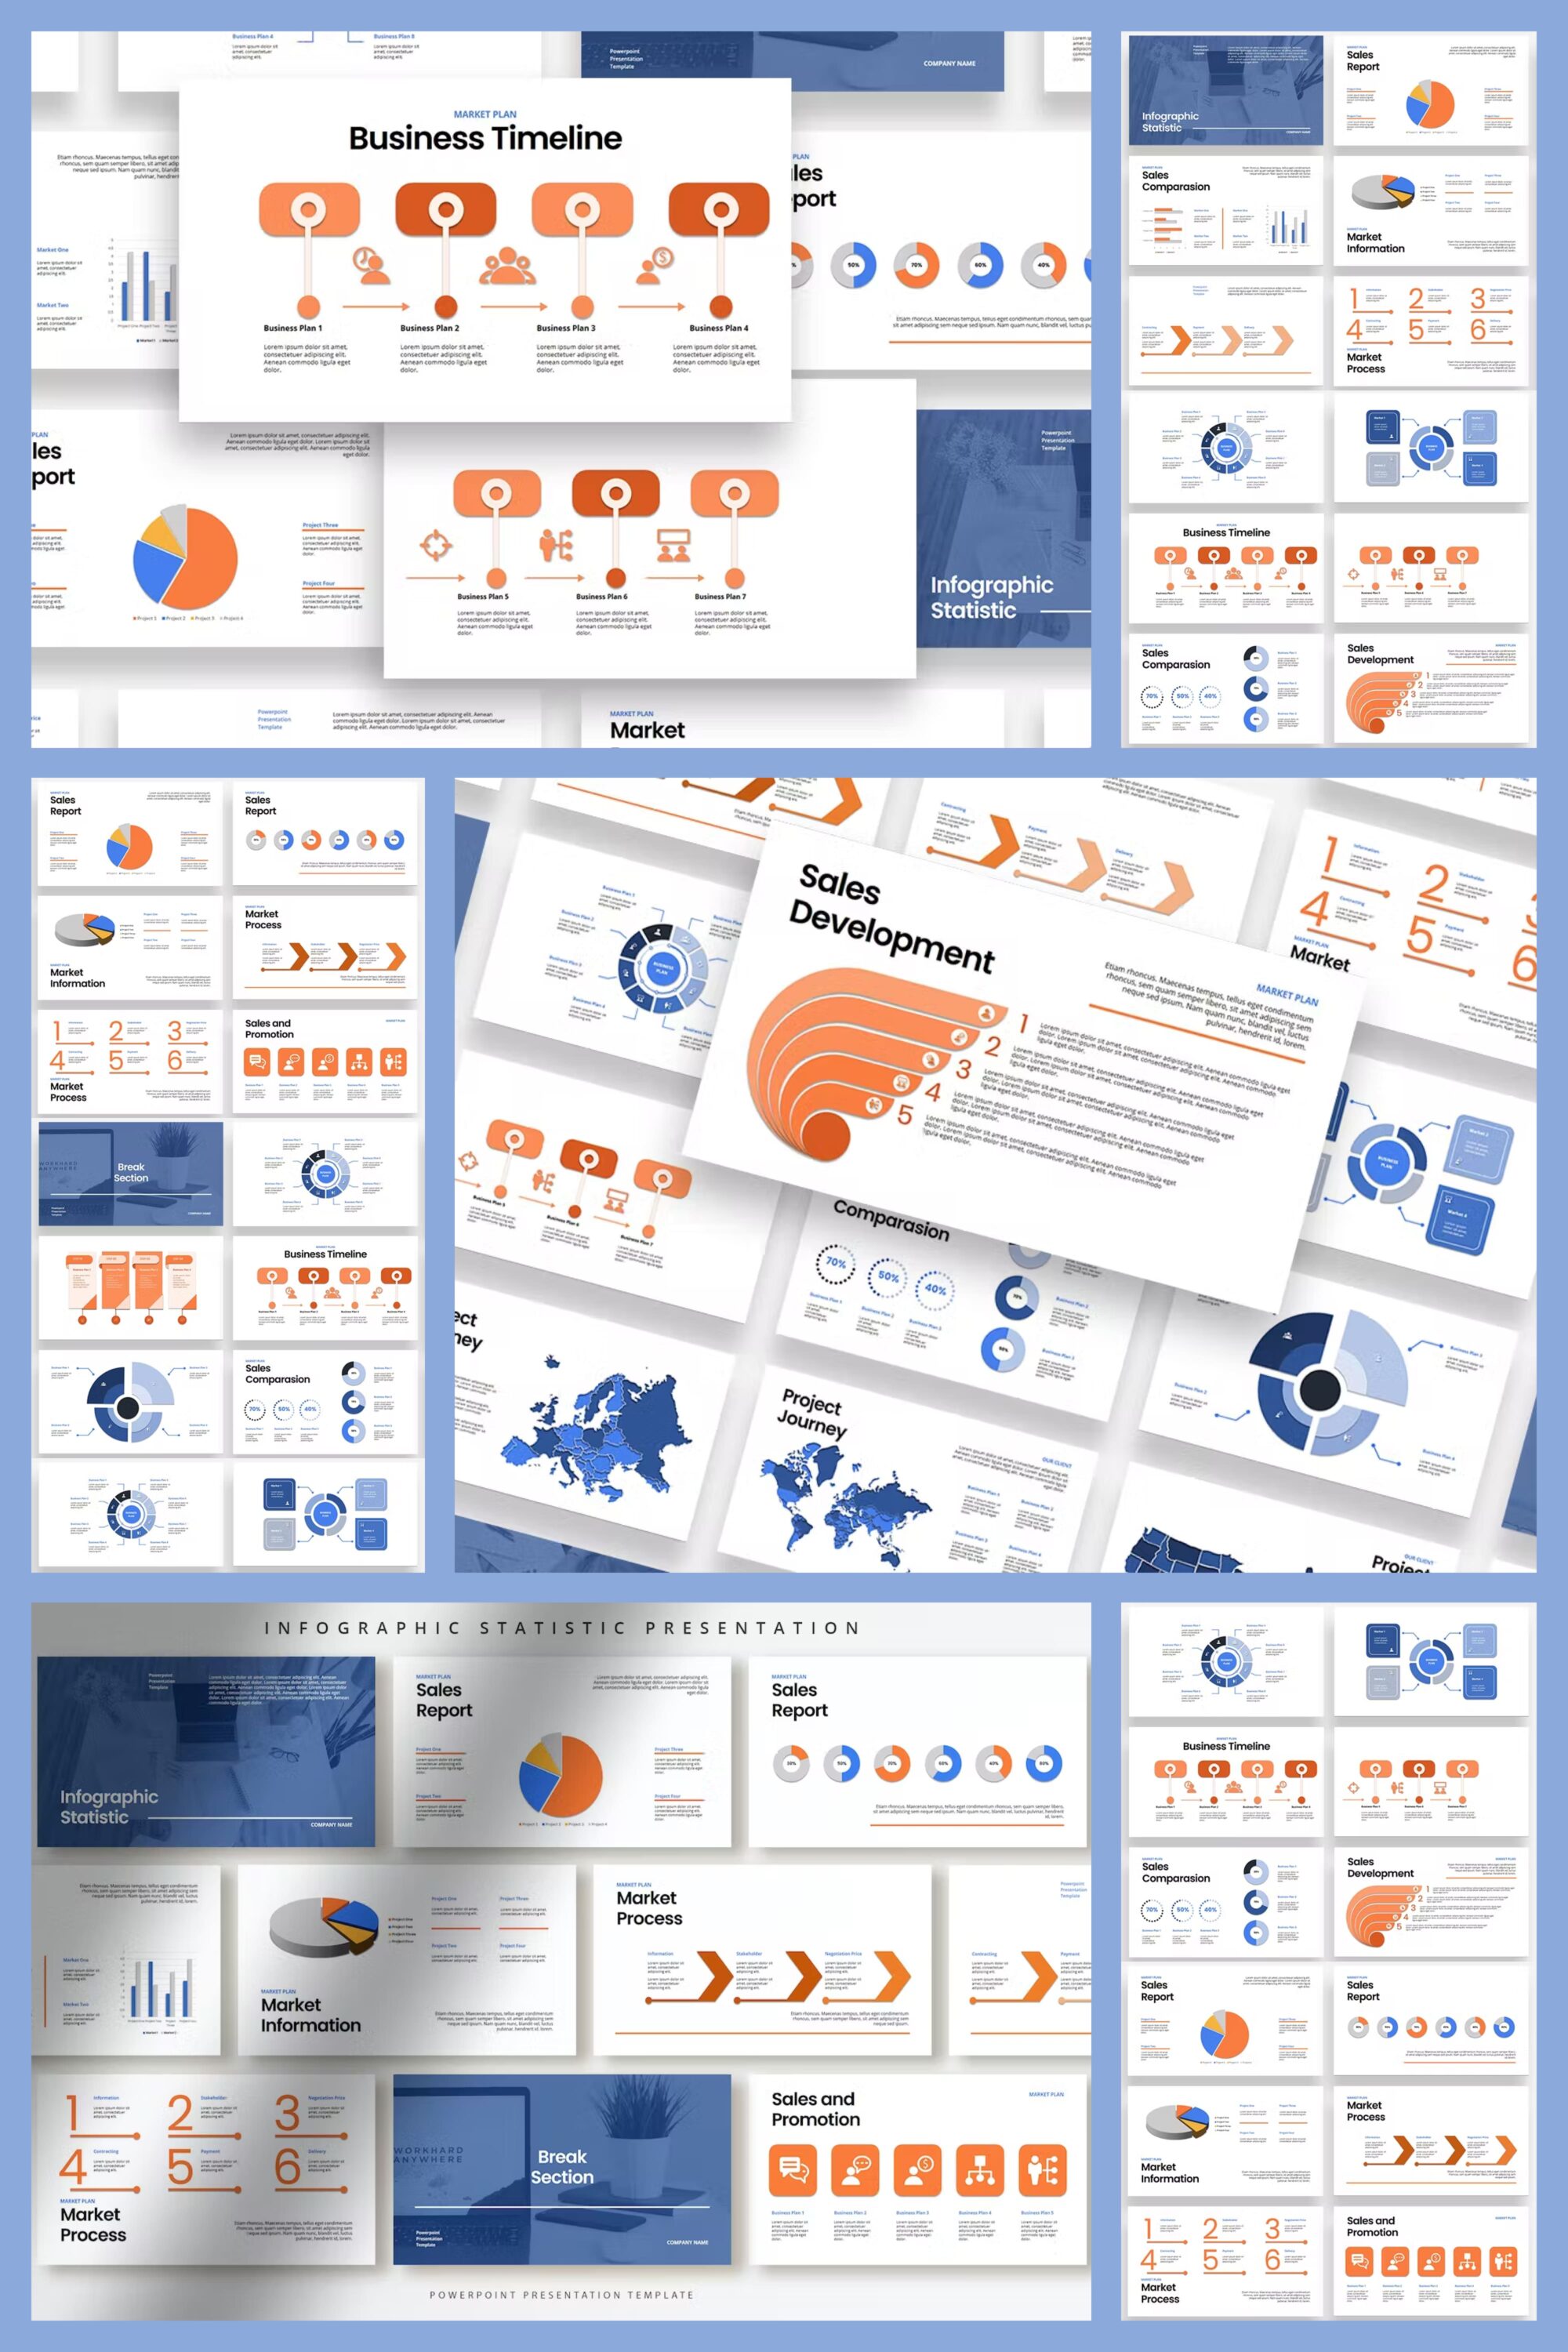 Professional Infographic Statistic Presentation - Pinterest image preview.